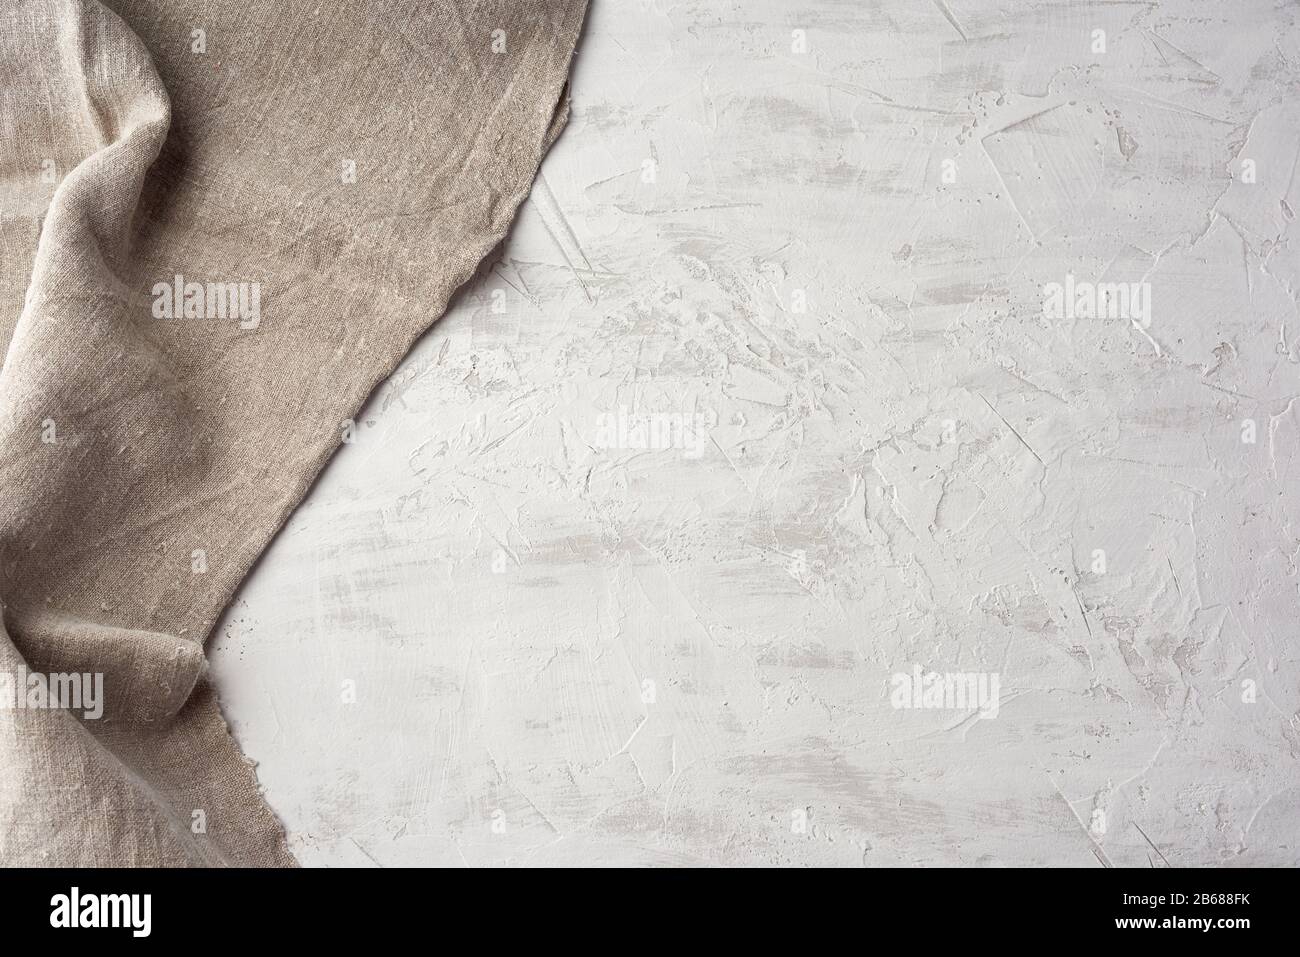 https://c8.alamy.com/comp/2B688FK/old-gray-vintage-kitchen-towel-on-white-cement-background-top-view-copy-space-2B688FK.jpg